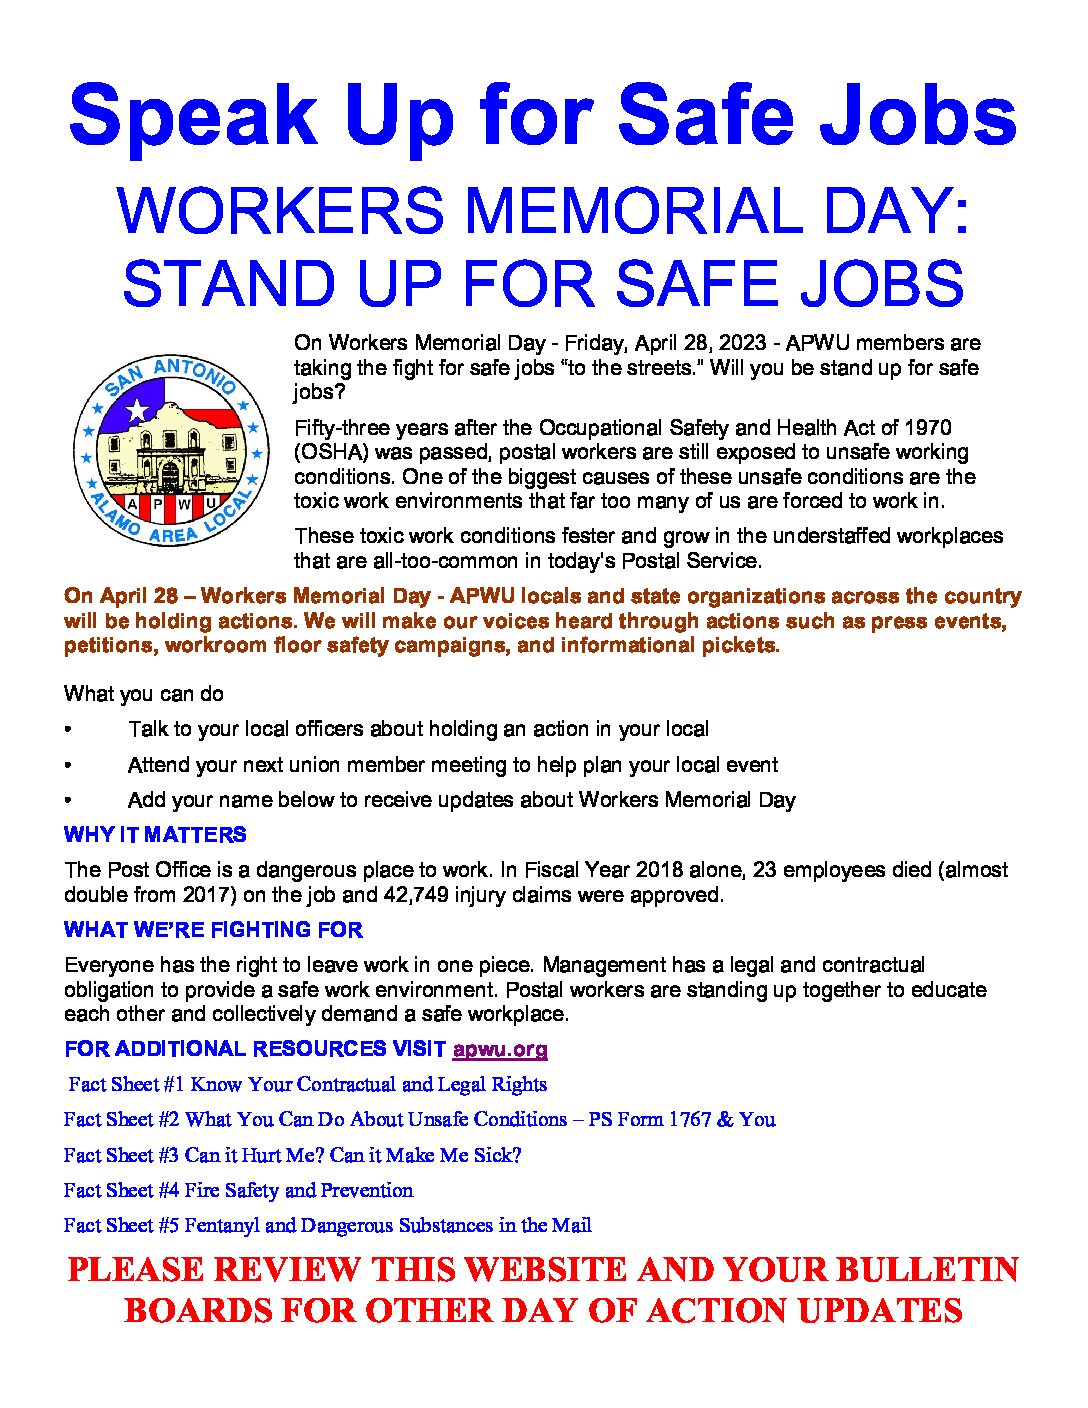 WORKERS MEMORIAL DAY: STAND UP FOR SAFE JOBS - 